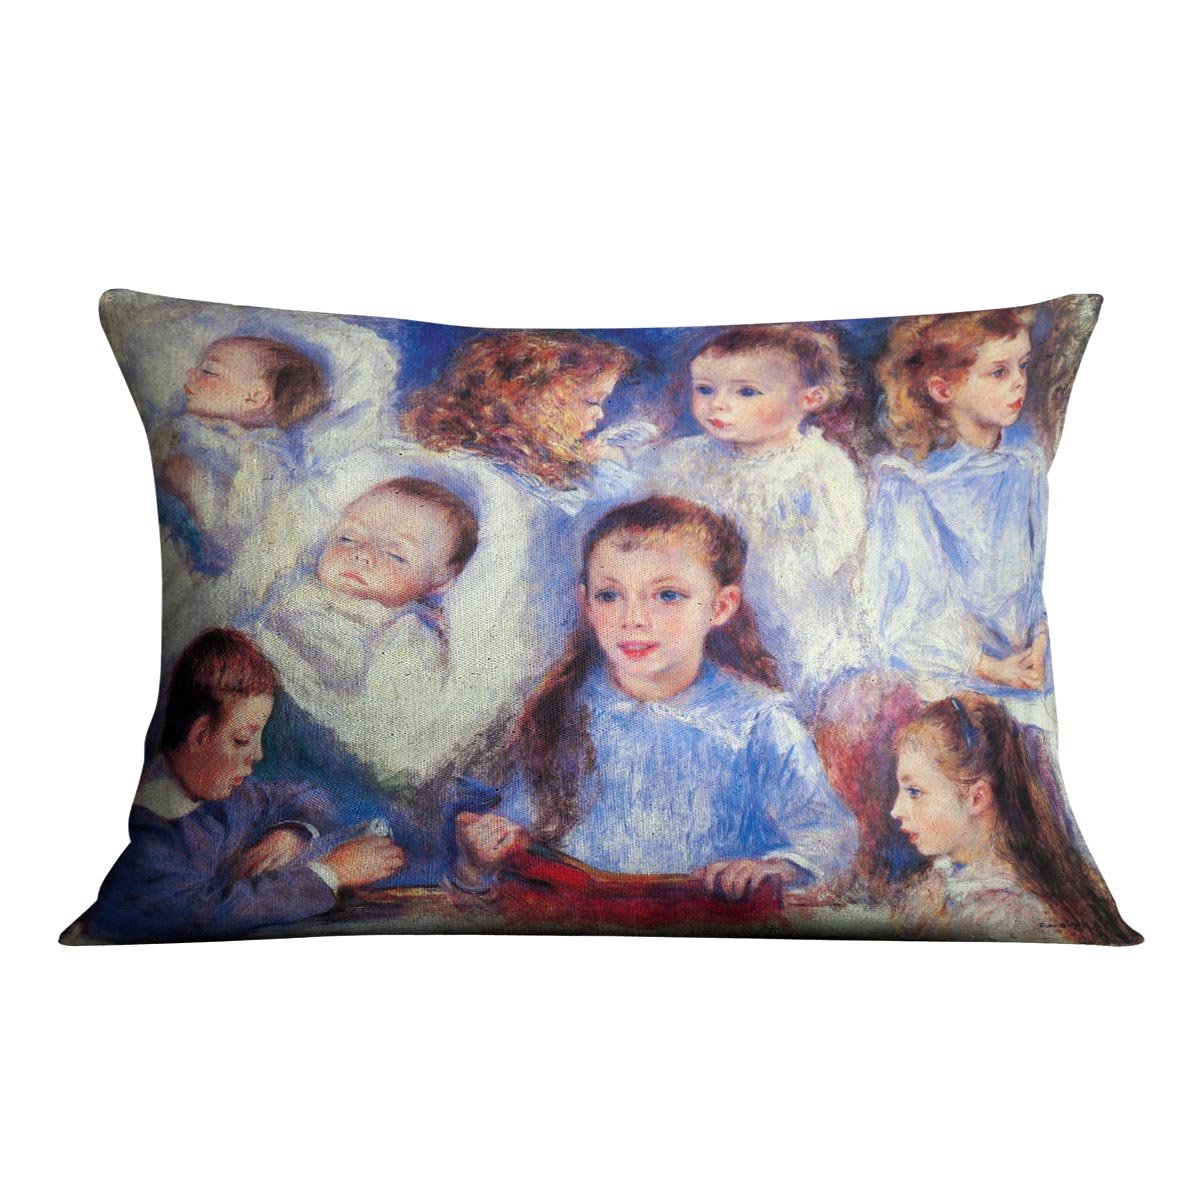 Images of childrens character heads by Renoir Throw Pillow